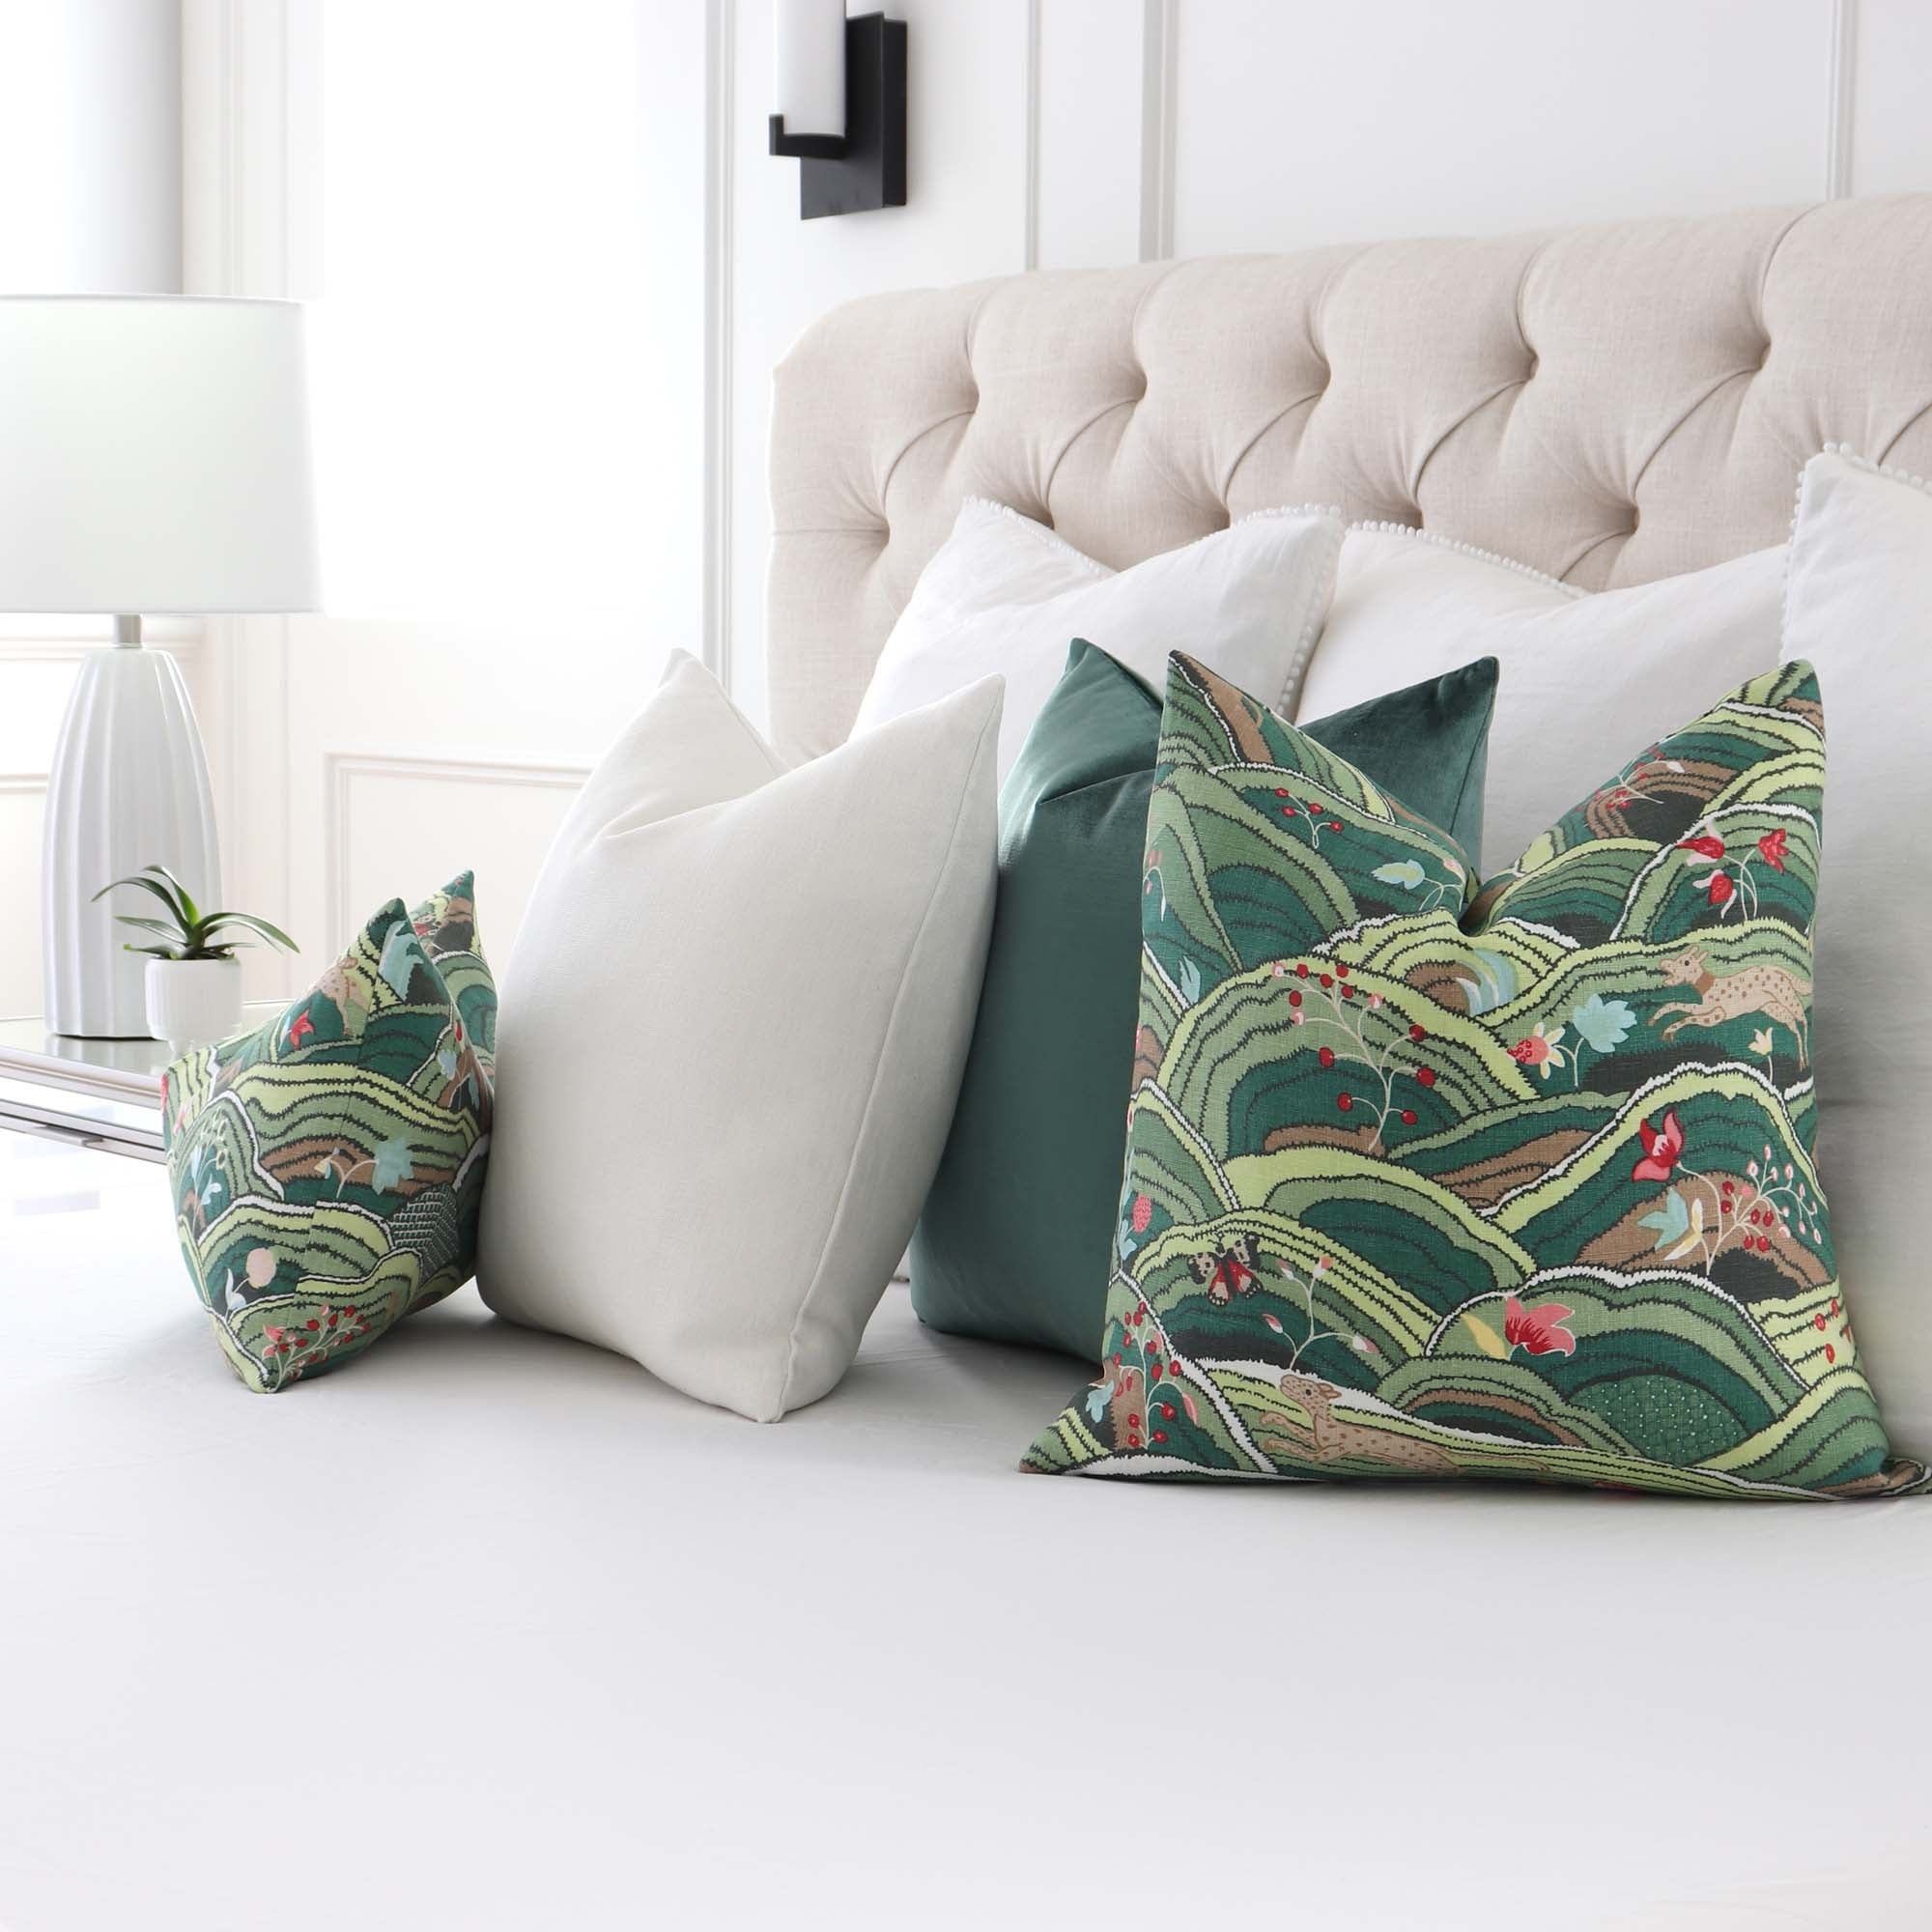 https://cdn.shopify.com/s/files/1/1116/9186/products/Schumacher-Rolling-Hills-Green-177381-Luxury-Designer-Throw-Pillow-Cover-in-Home-Decor-Bedroom_2000x.jpg?v=1621739256